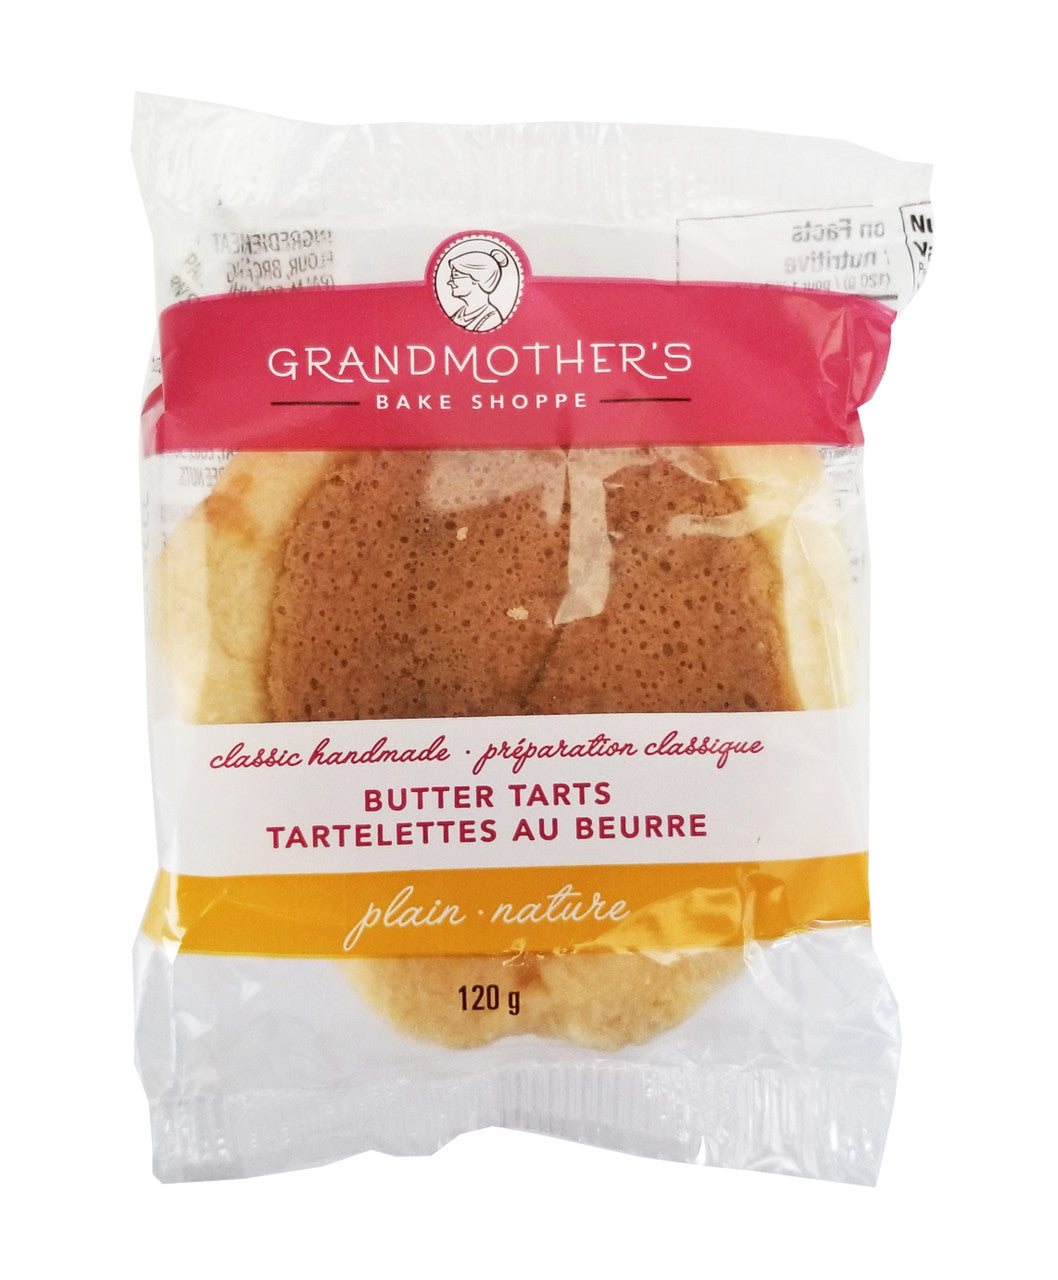 Grandmother's Bake Shoppe Plain Butter Tarts, 120g/4.2 oz., 1 Tart {Imported from Canada}